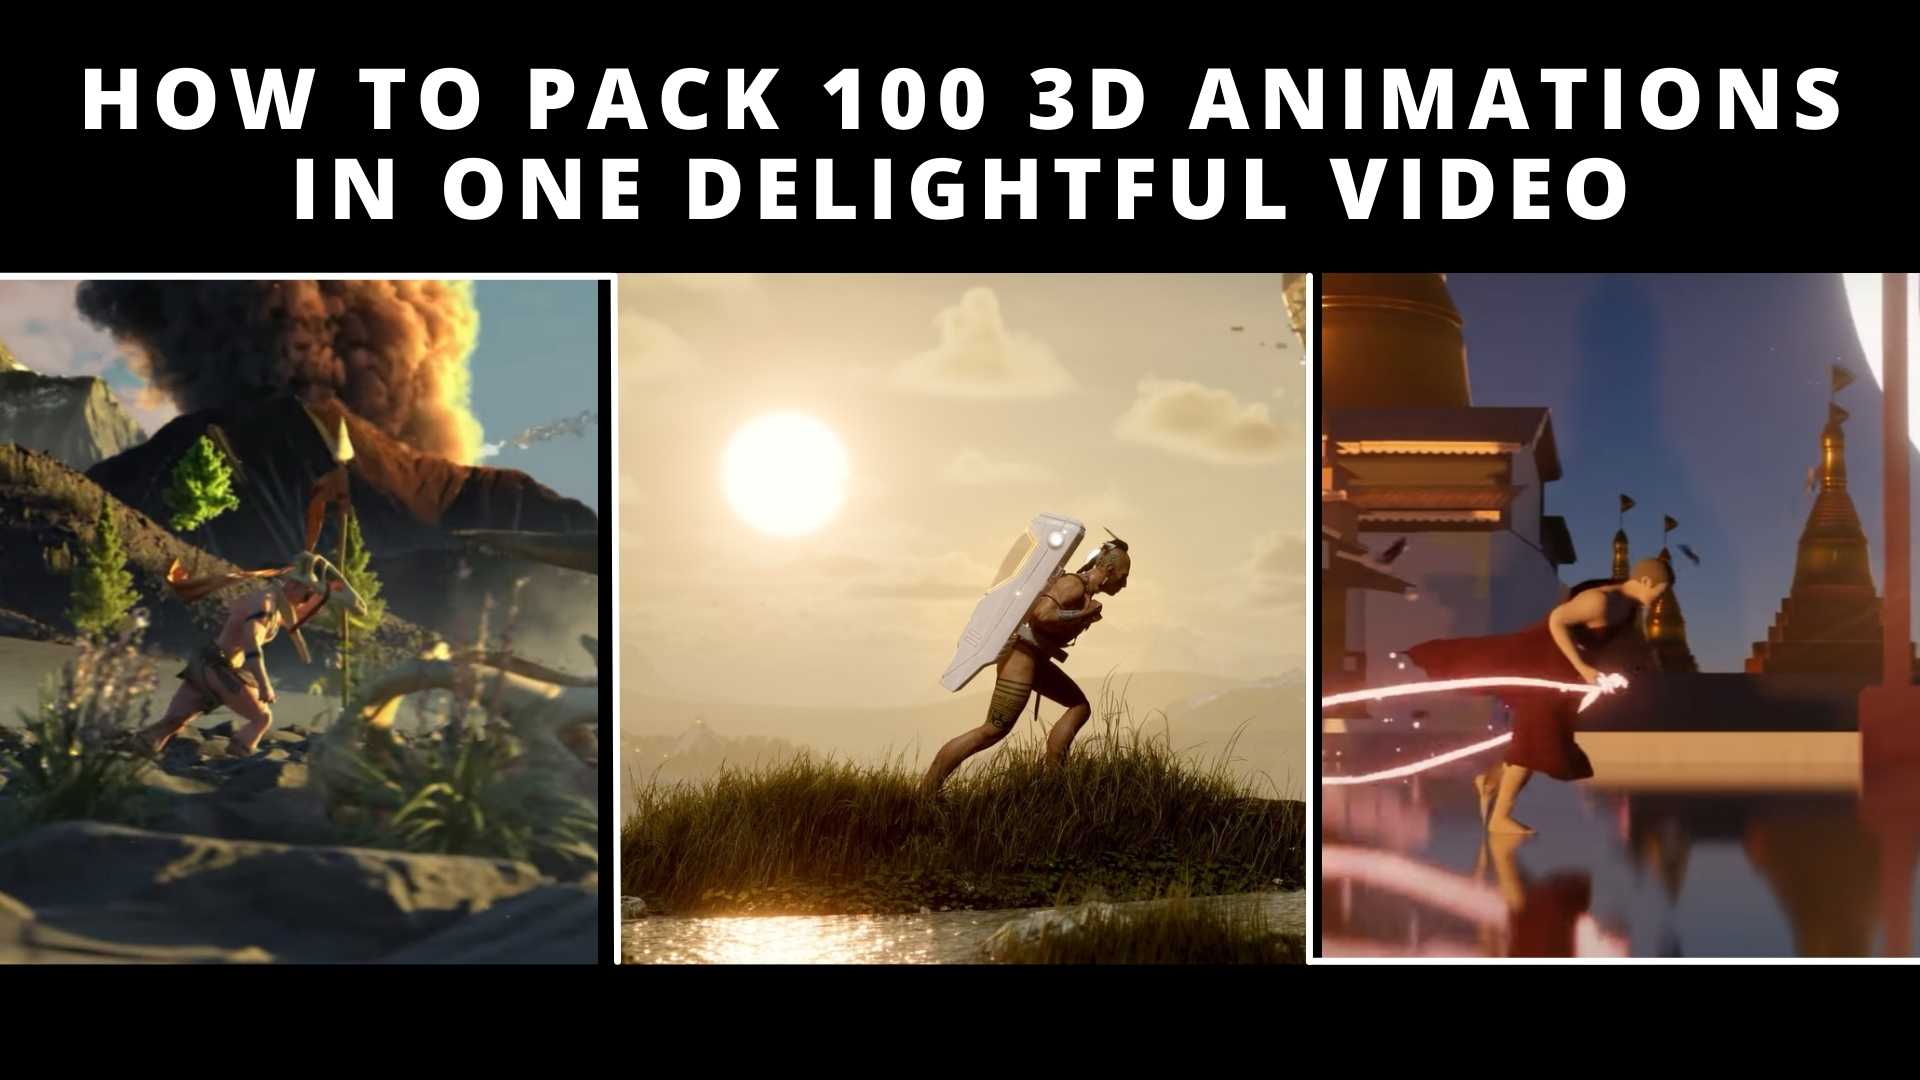 How to pack 100 3D animations in one delightful video